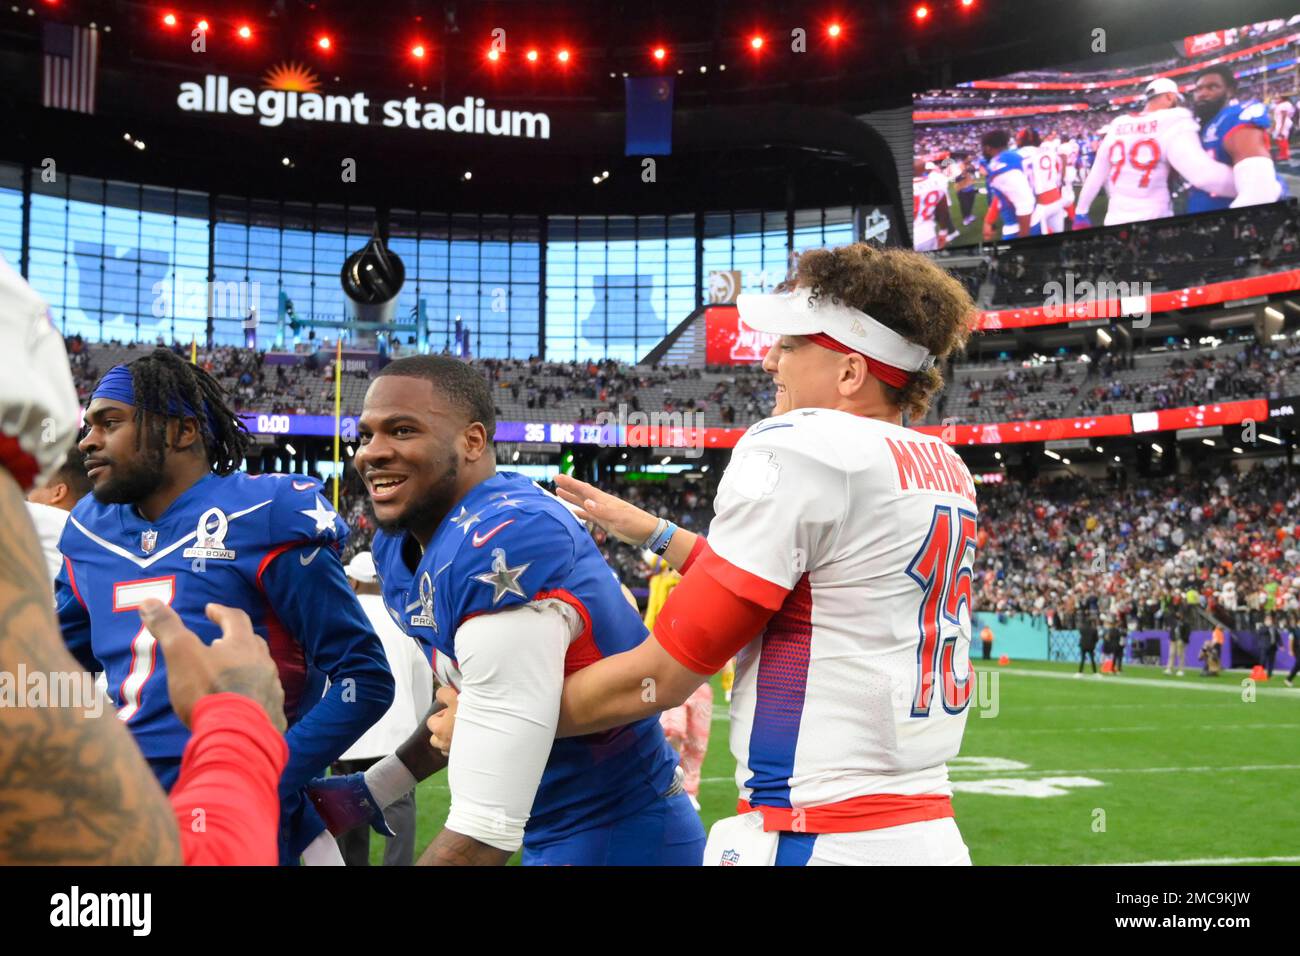 AFC quarterback Patrick Mahomes, right, of the Kansas City Chiefs, greets  NFC inside linebacker Micah Parsons, center, of the Dallas Cowboys, after  the Pro Bowl NFL football game at Allegiant Stadium, Sunday,